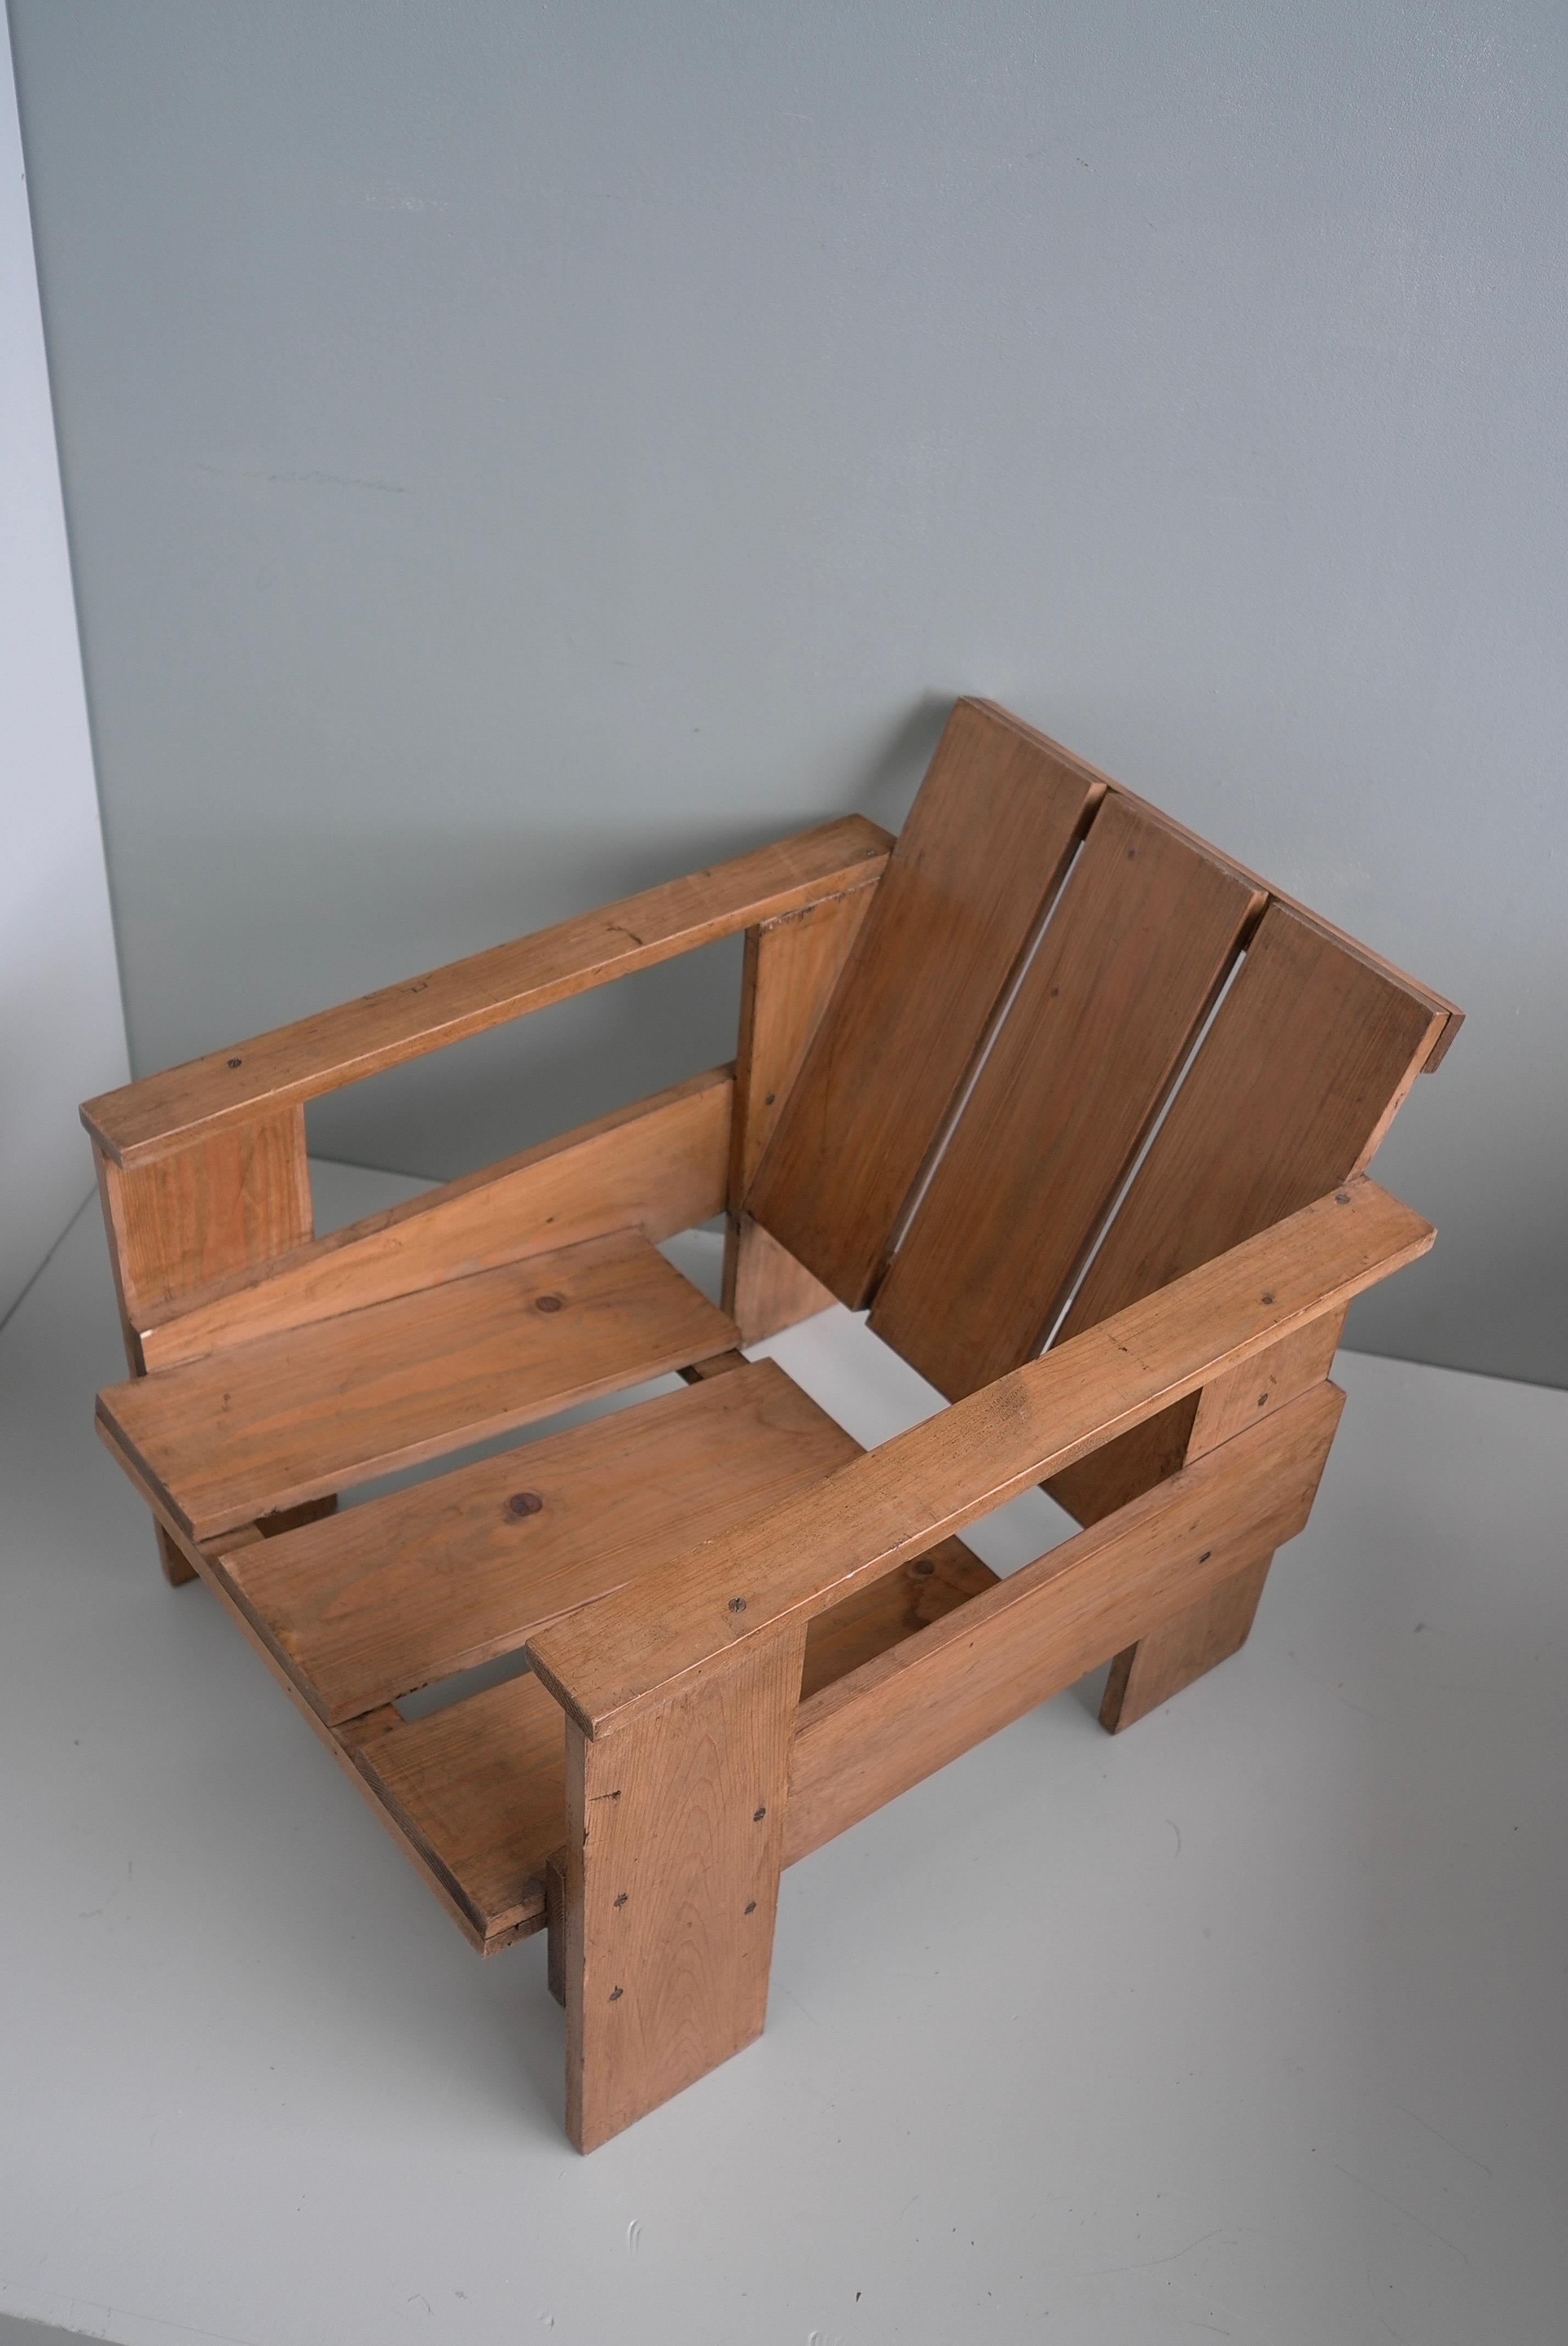 Crate Chair in style of Gerrit Rietveld, The Netherlands 1960's For Sale 8